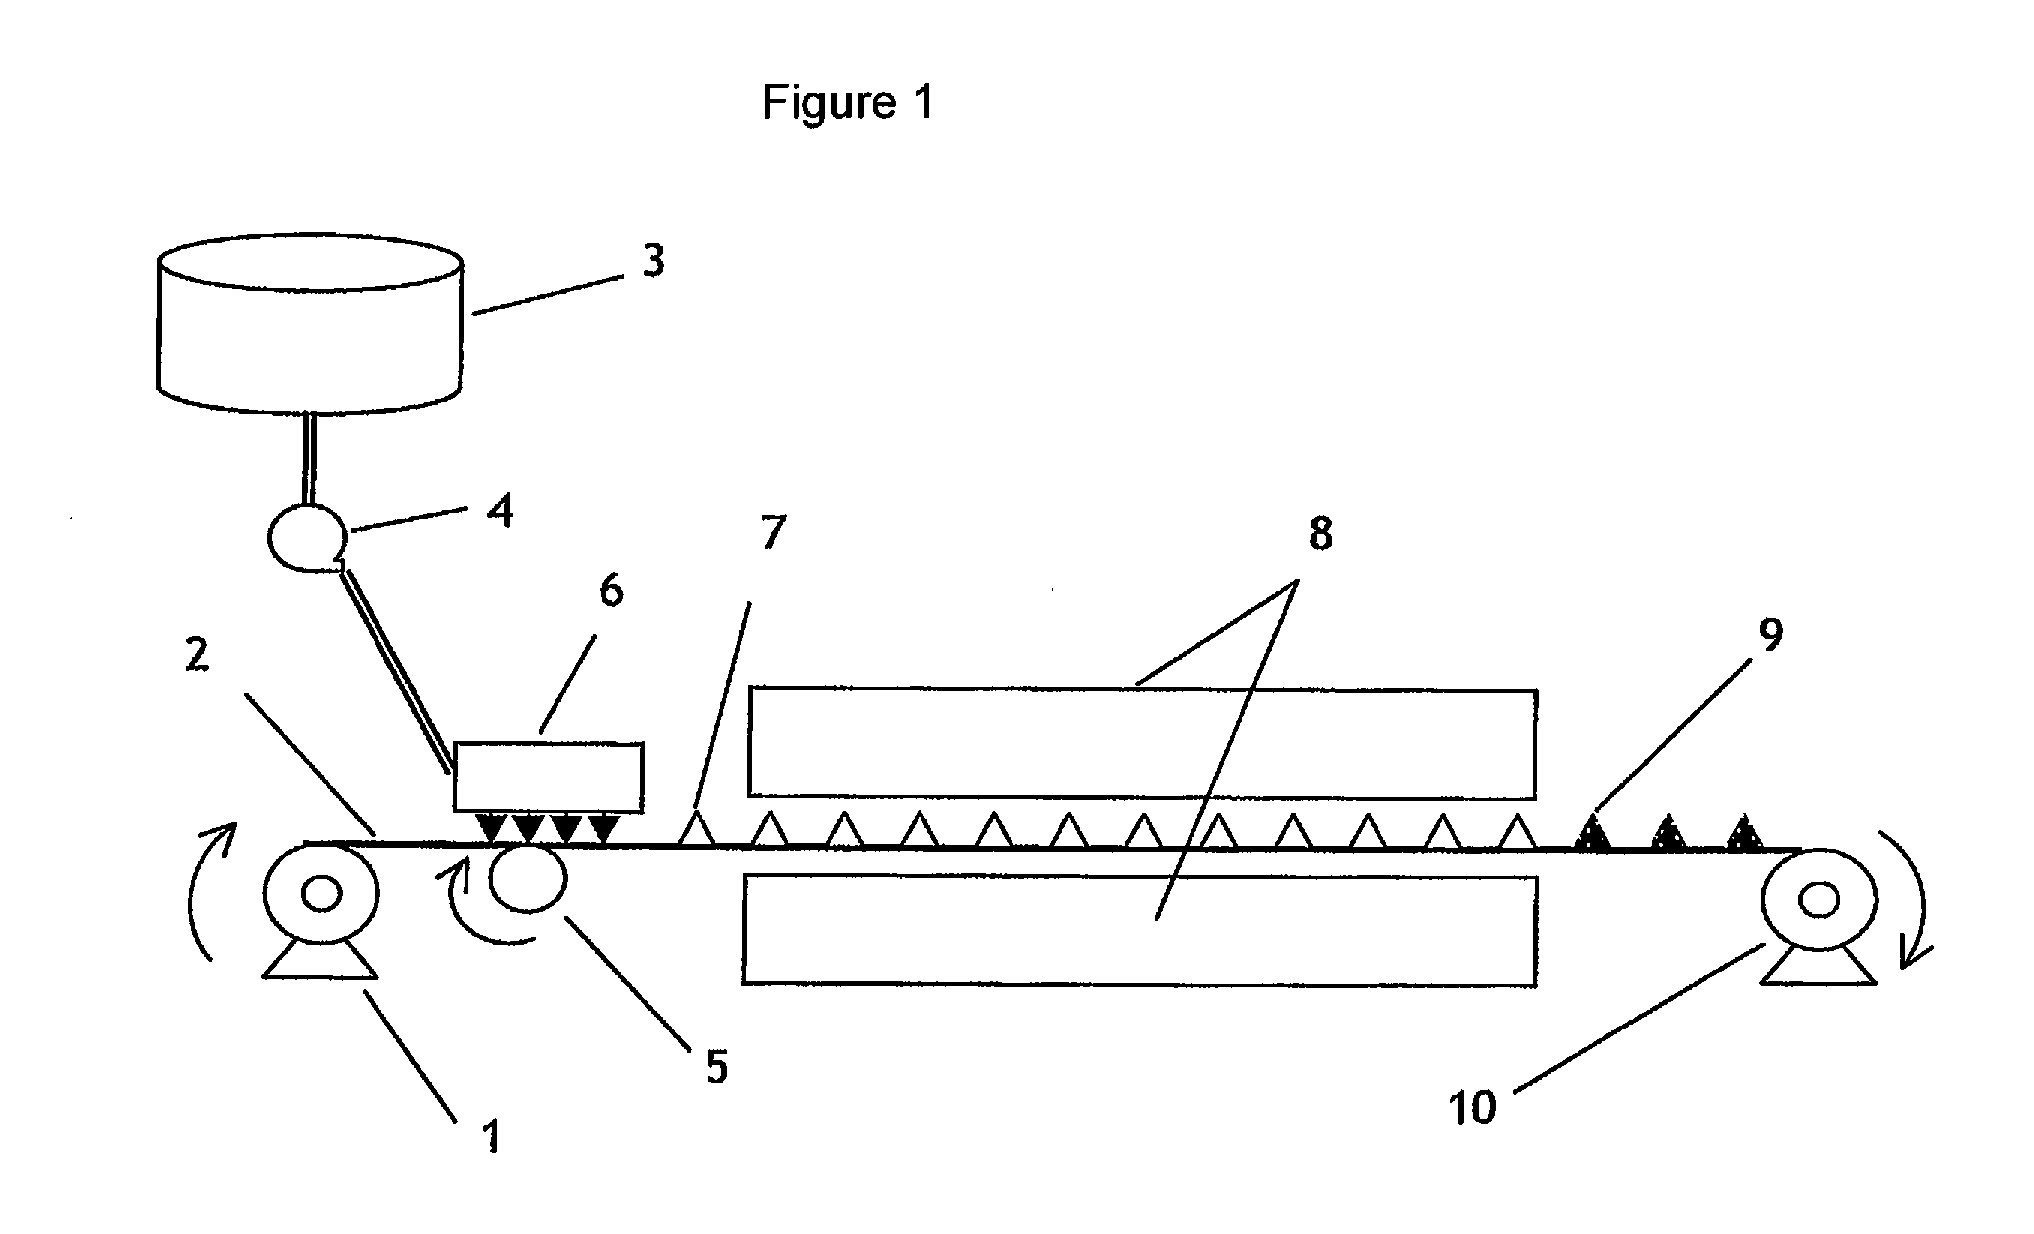 Waterproofing Membrane for Use on Inclined Surfaces